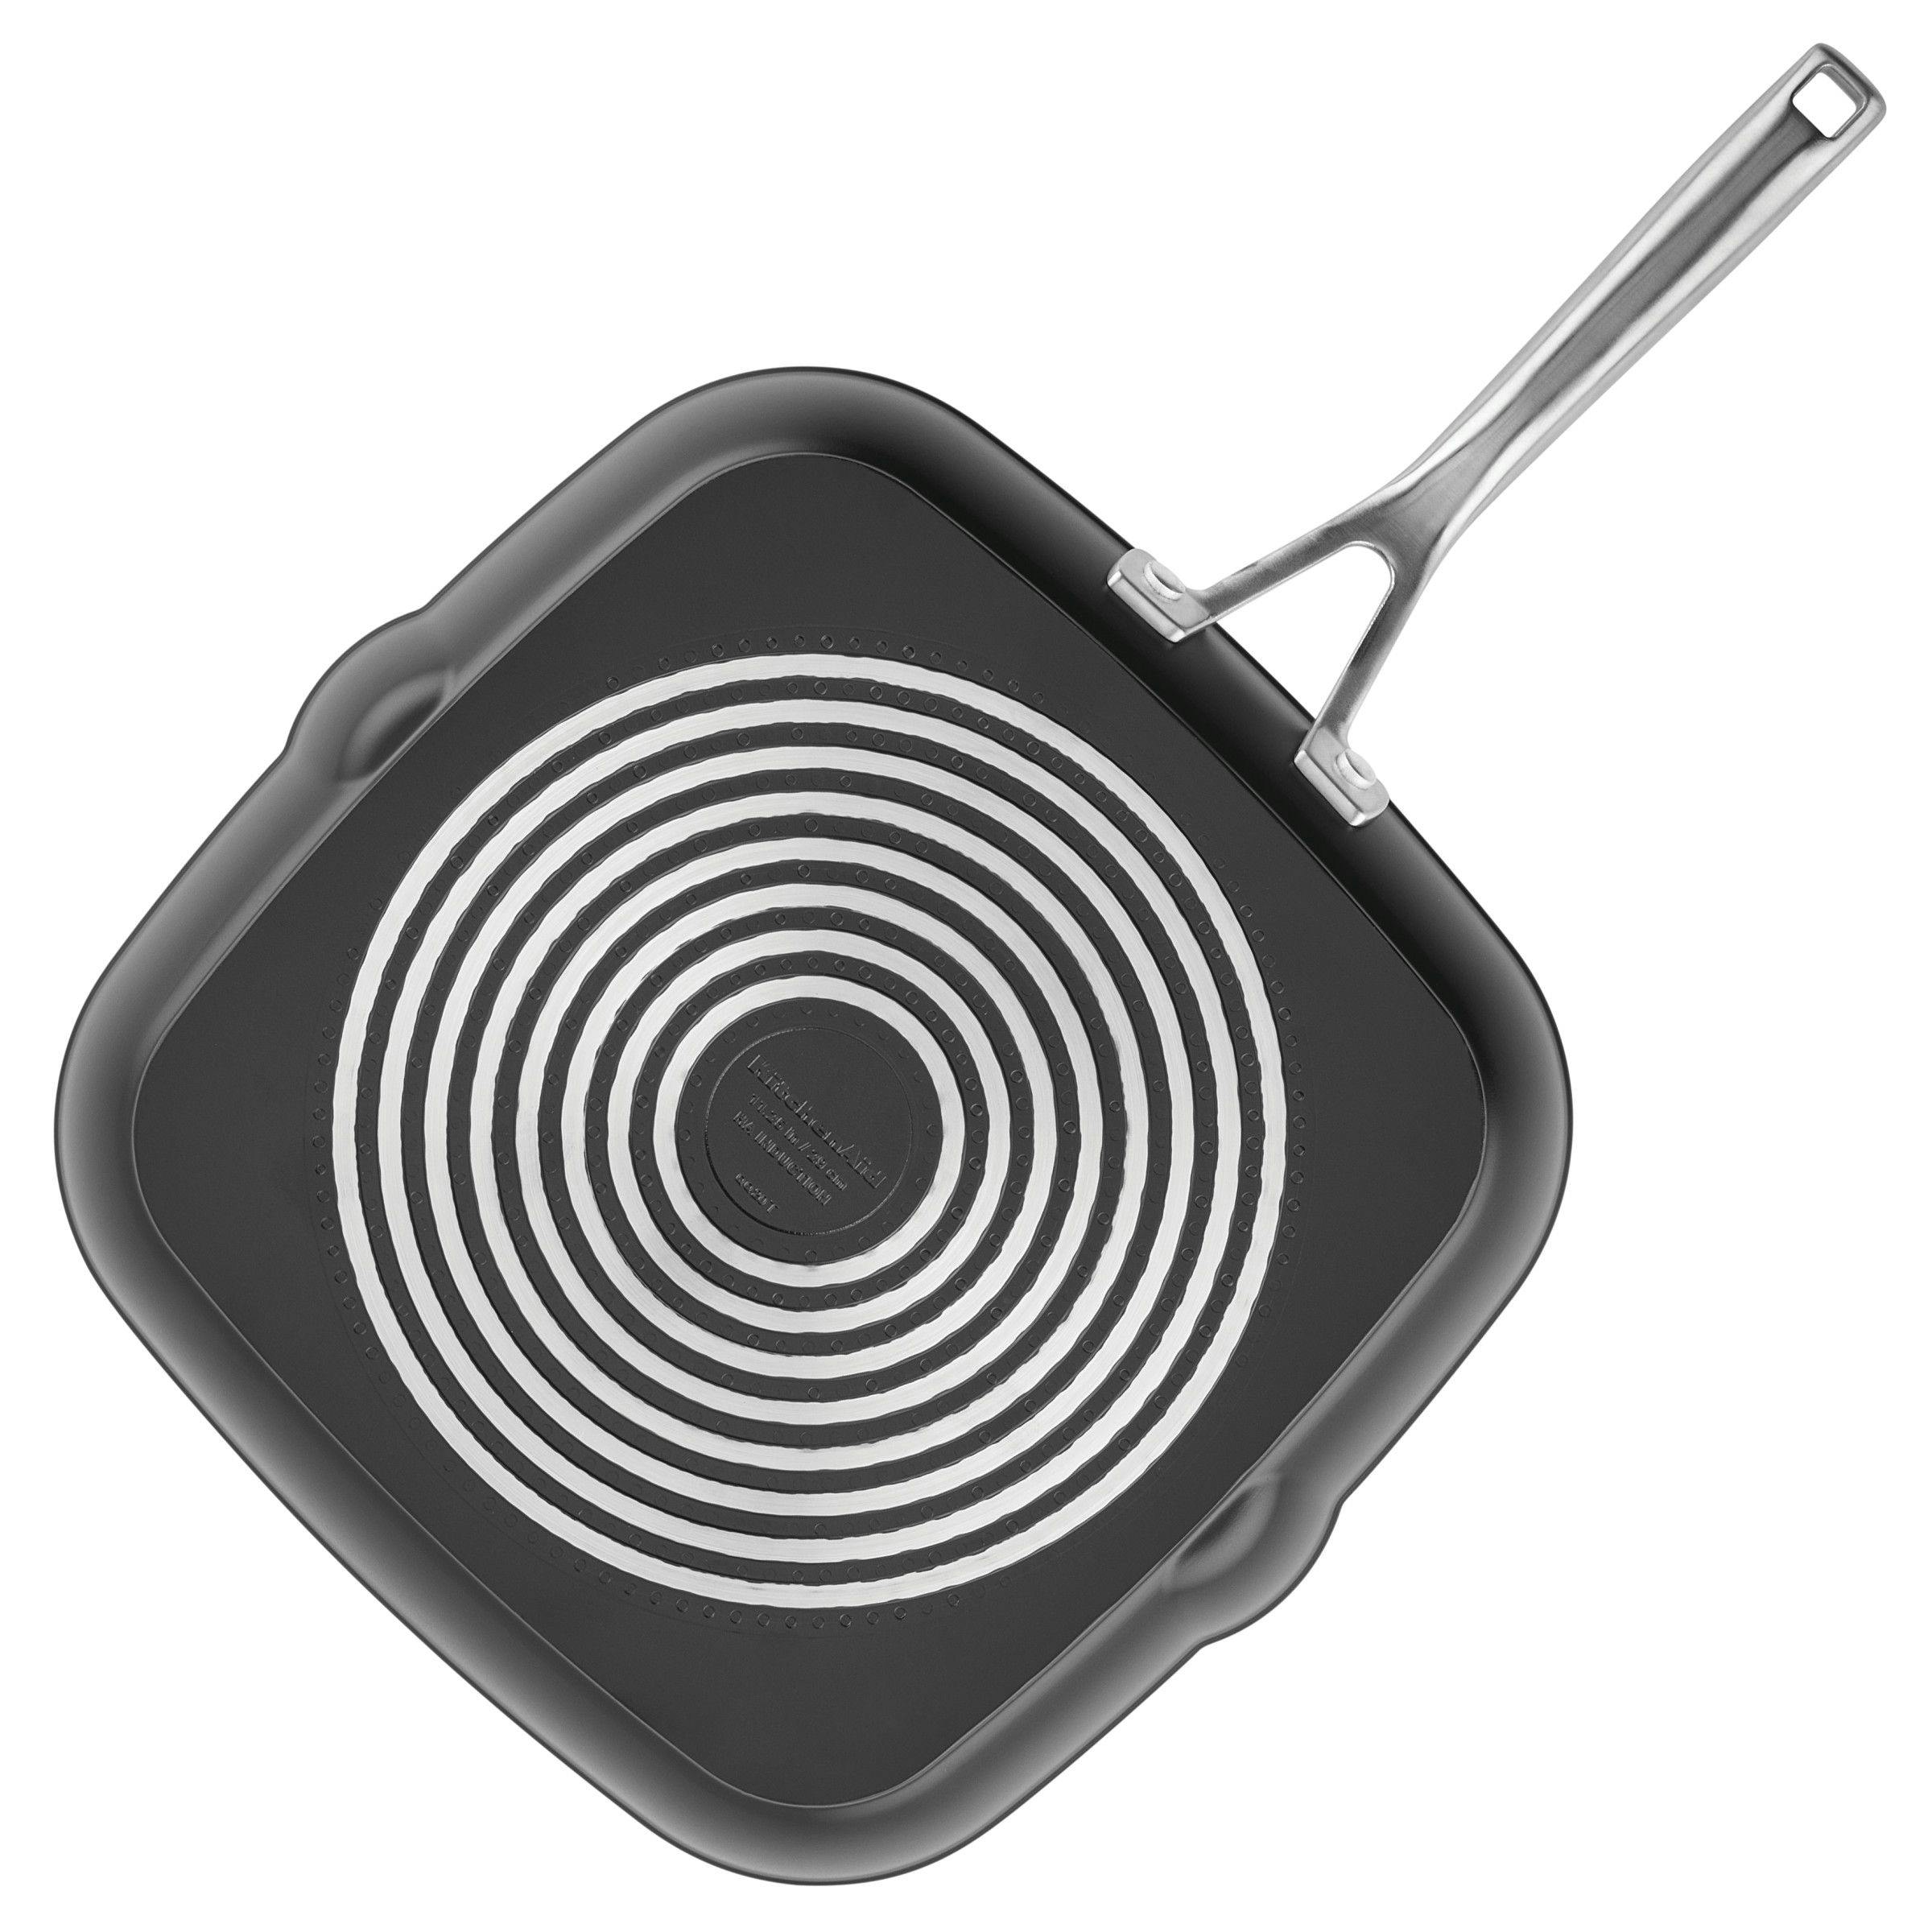 KitchenAid Hard-Anodized Induction Nonstick Square Grill Pan, 11.25-Inch, Matte Black